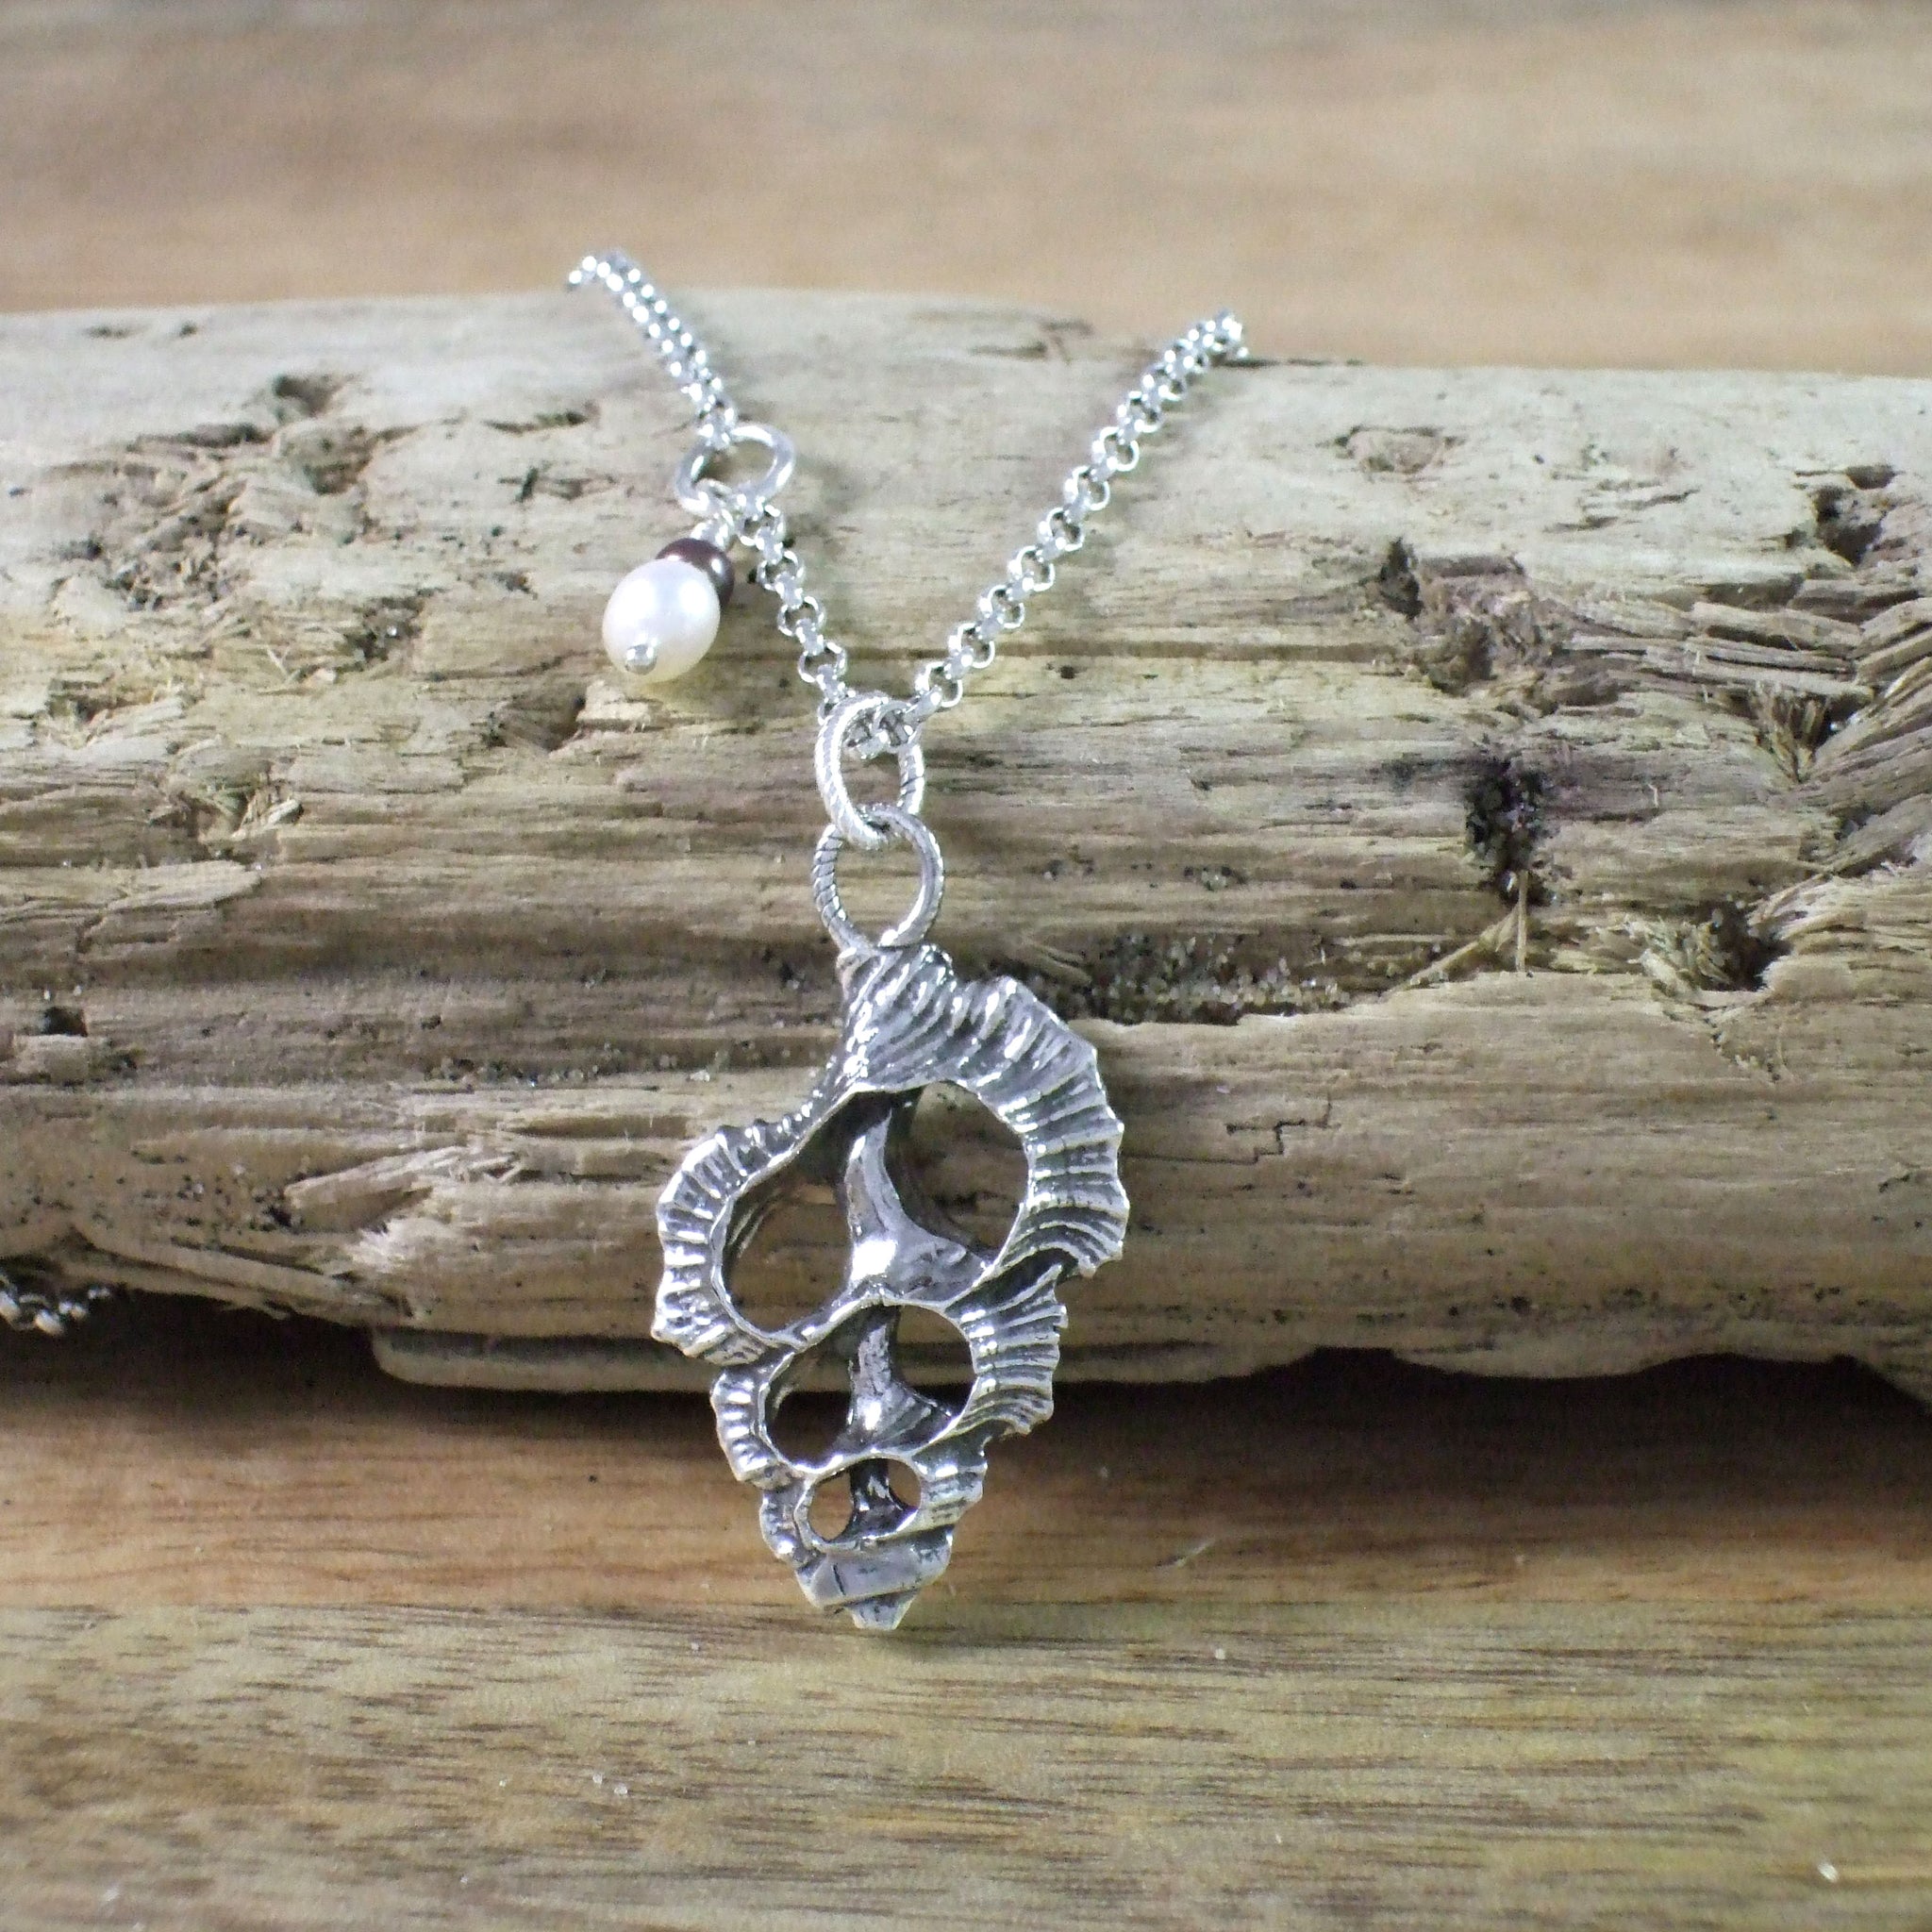 Frilly Shell Slice Necklace with Pearl Accent in Recycled Sterling Silver